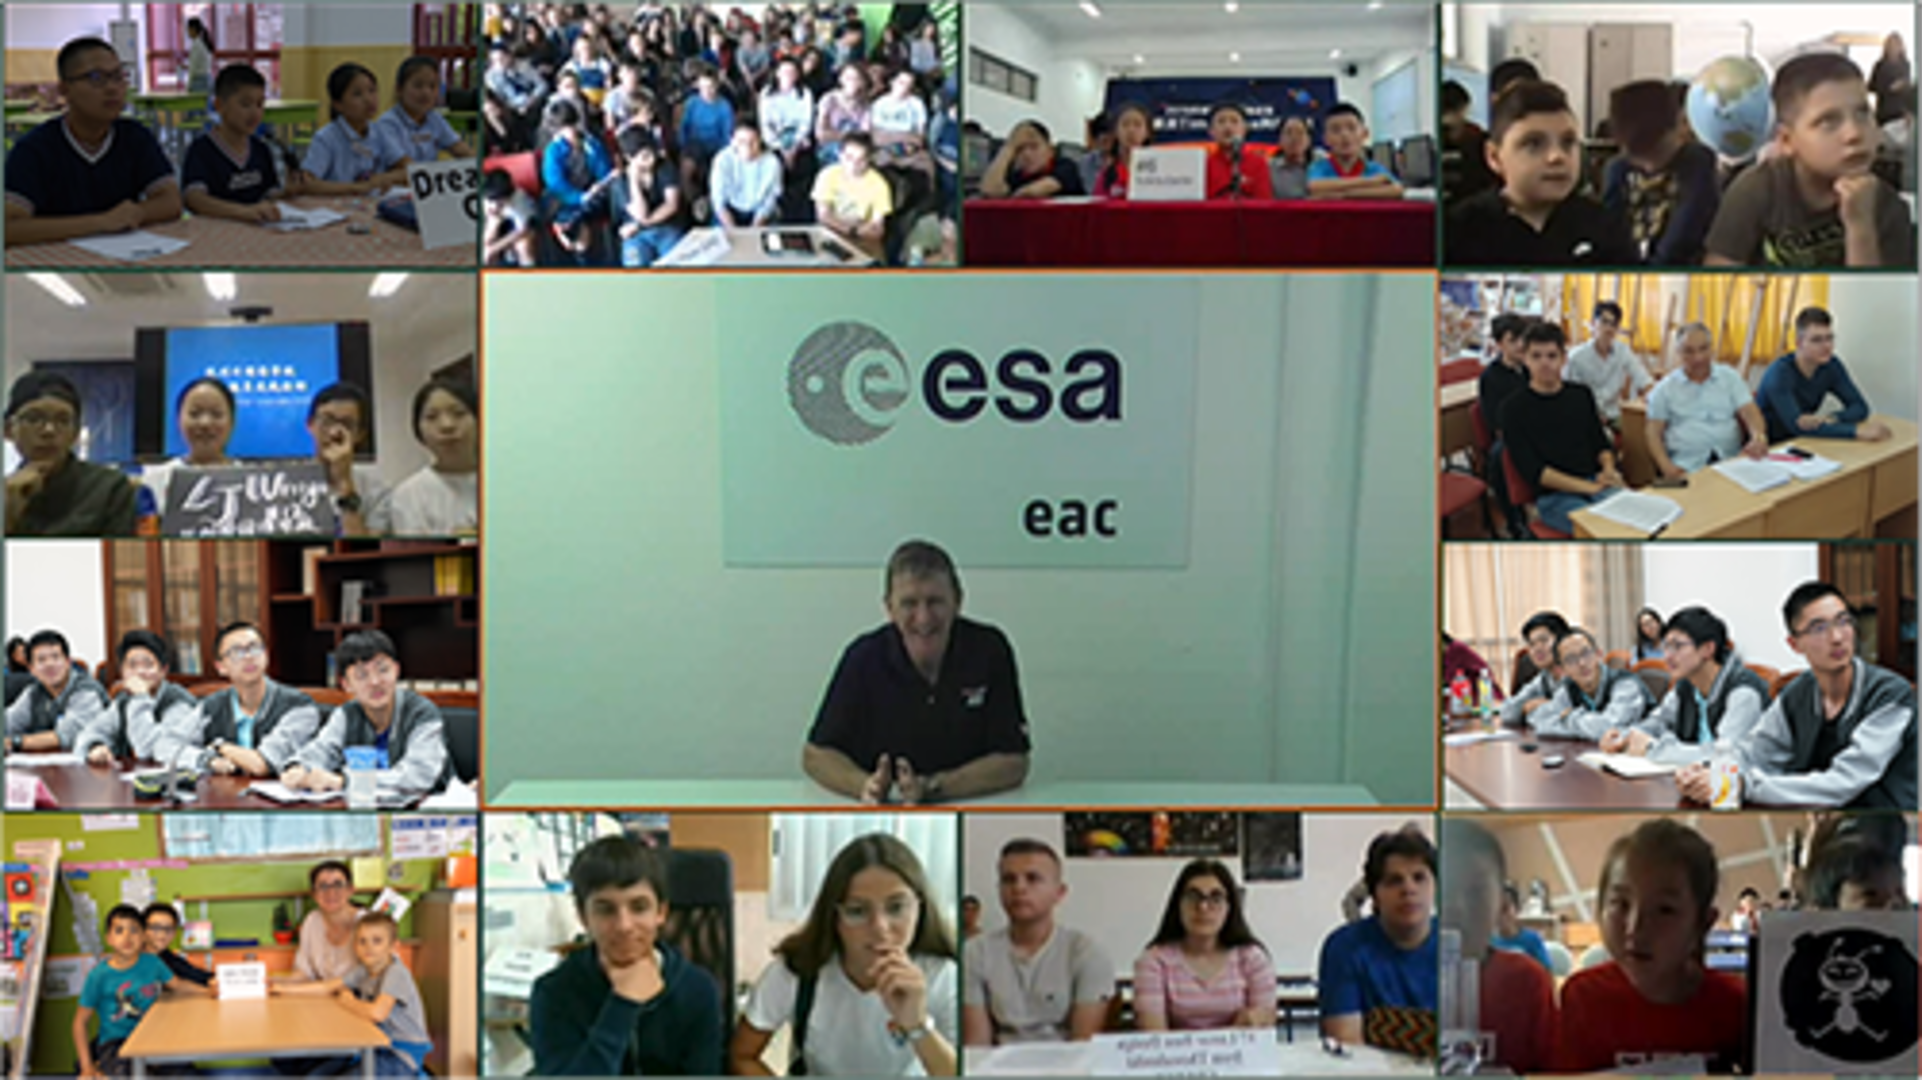 ESA astronaut Tim Peake speaks to winning teams of the Moon Camp Challenge for young students